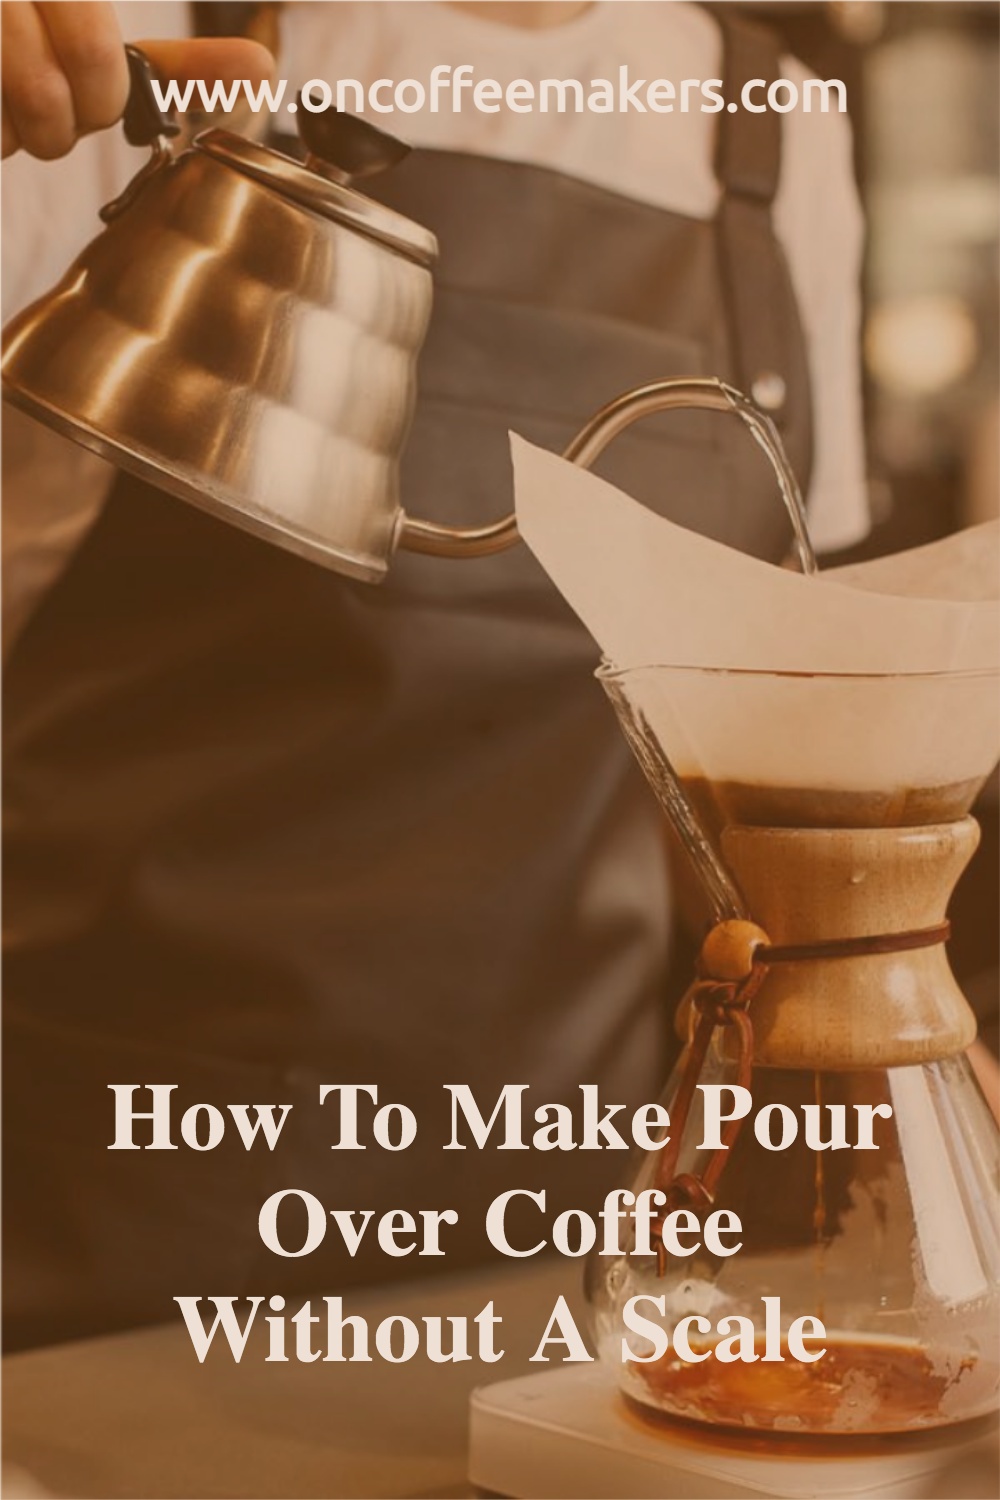 How-To-Make-Pour-Over-Coffee-Without-A-Scale.jpg